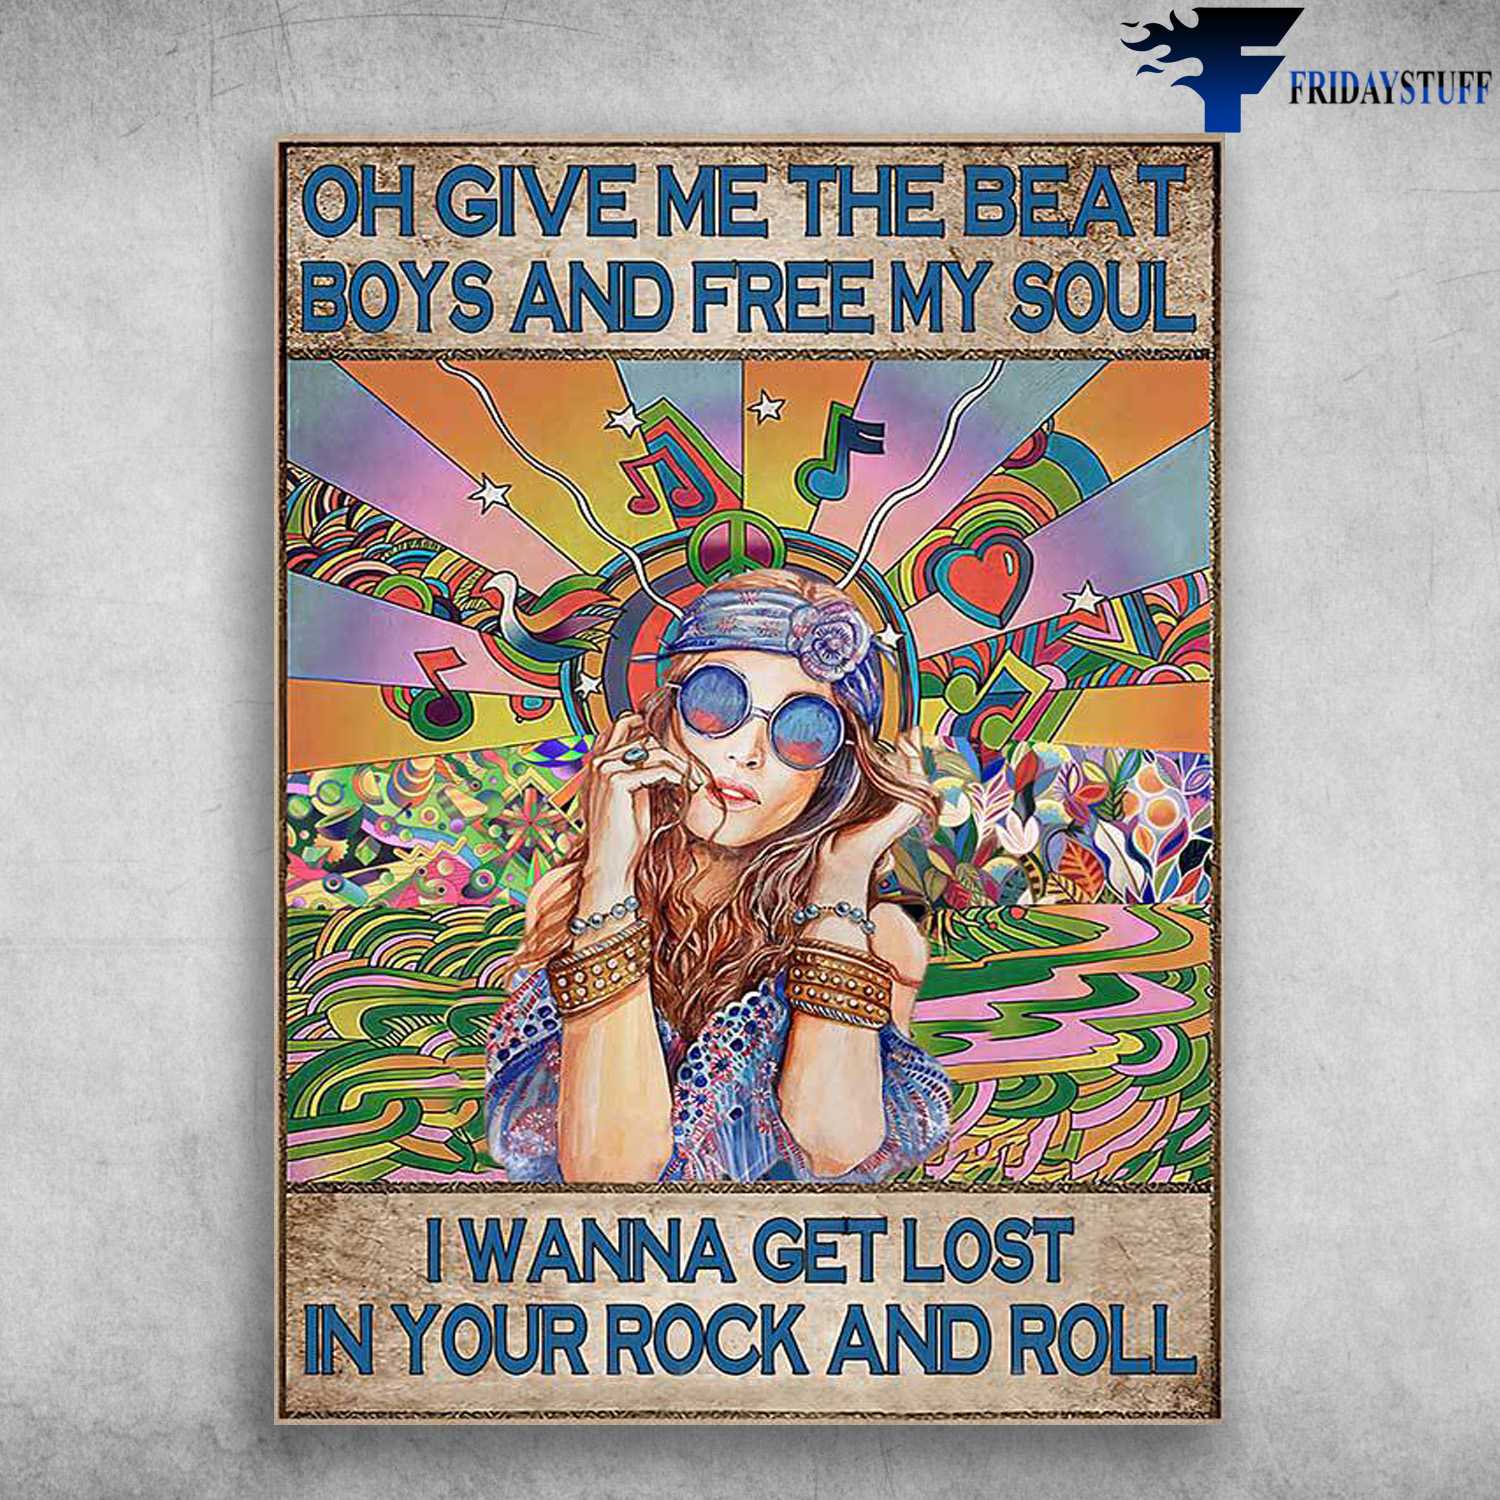 Hippie Girl - Oh Give Me The Beat, Boys And Free My Soul, I Get Lost, In Rock And Roll - FridayStuff